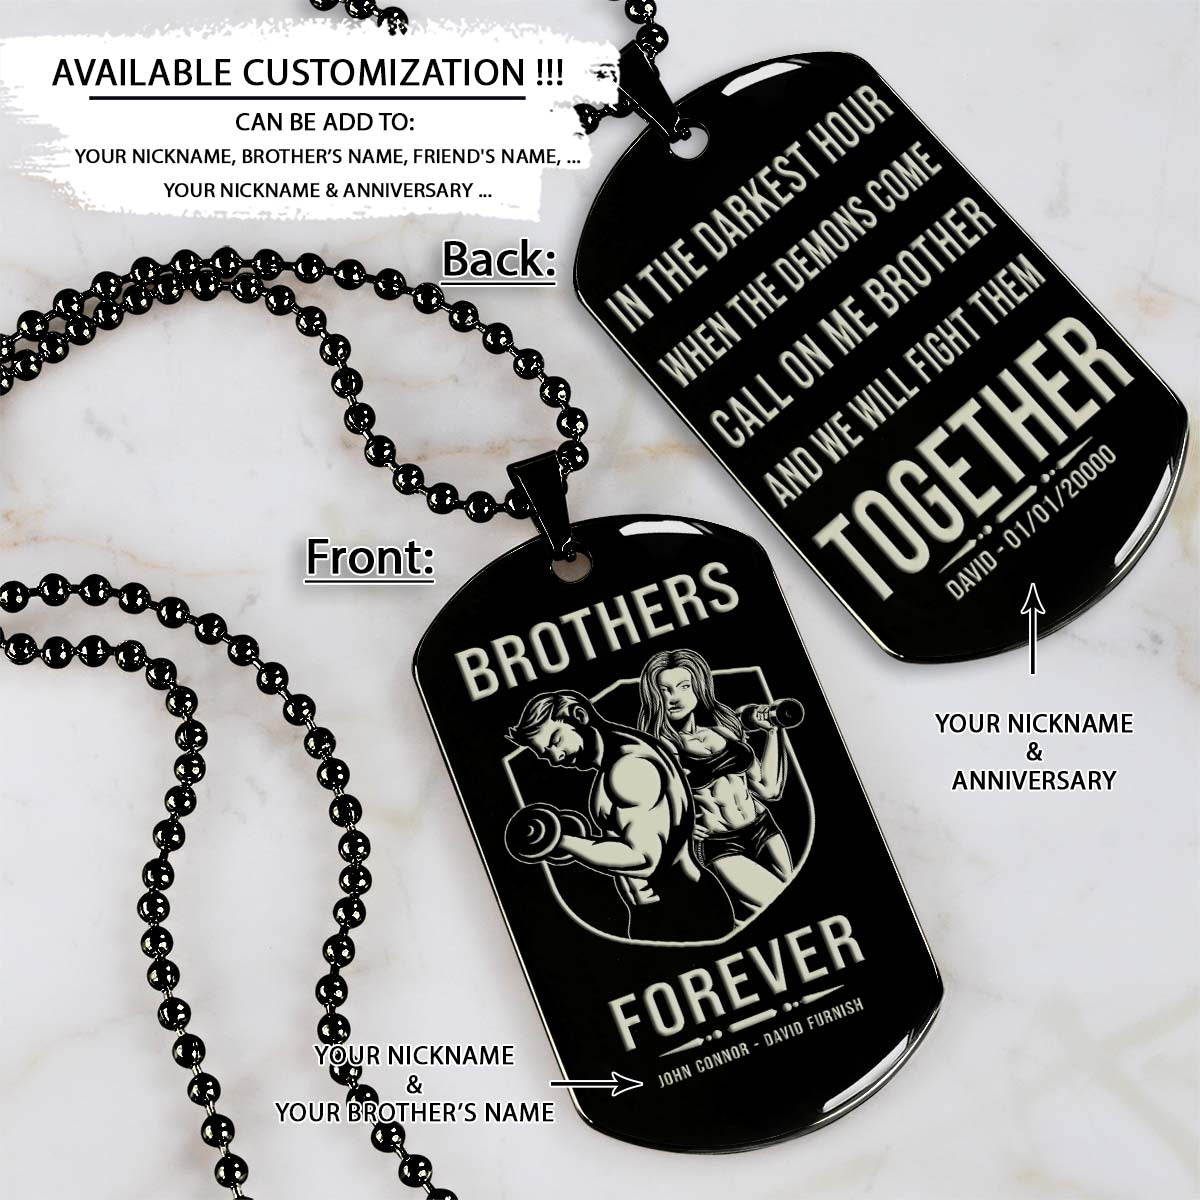 GYMD012 - Brothers Forever - Call On Me Brother - Gym - Fitness Center - Workout - Gym Dog Tag - Gym Necklace - Black Engrave Dog Tag